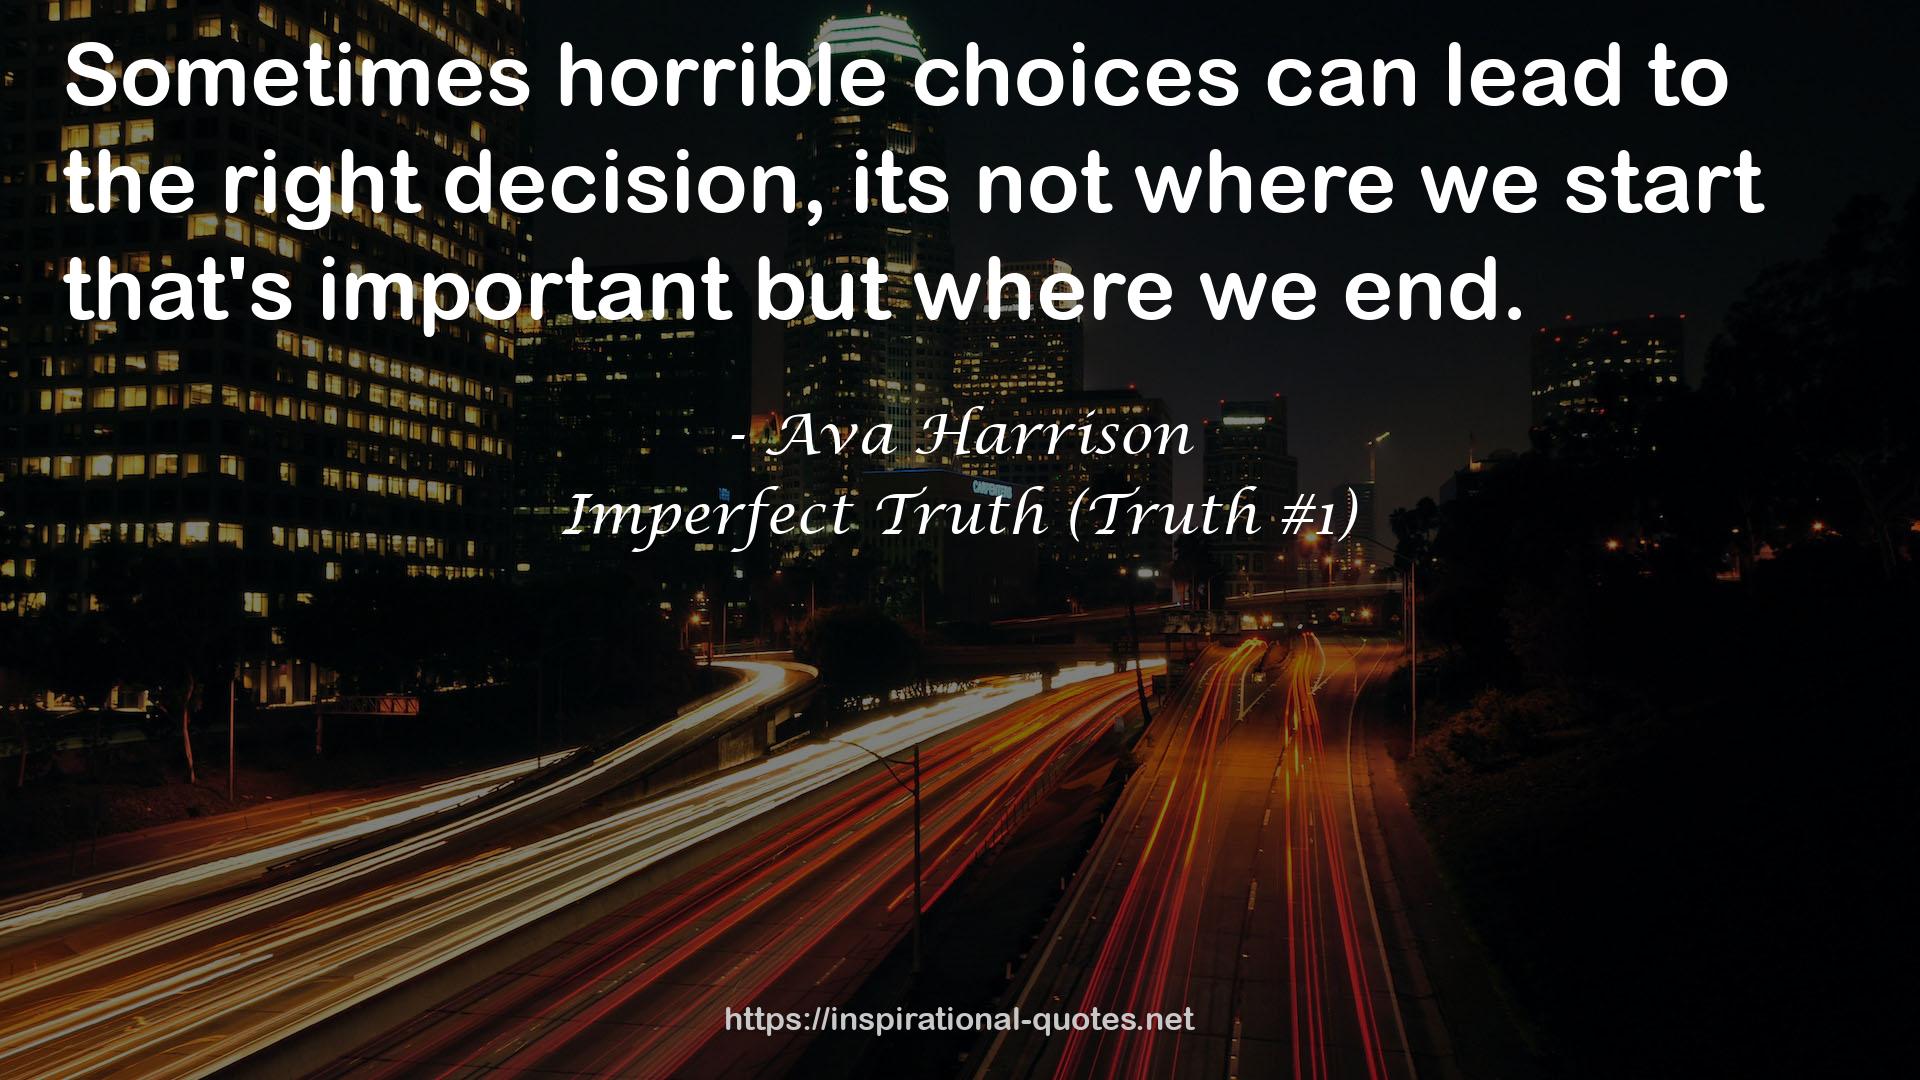 Imperfect Truth (Truth #1) QUOTES